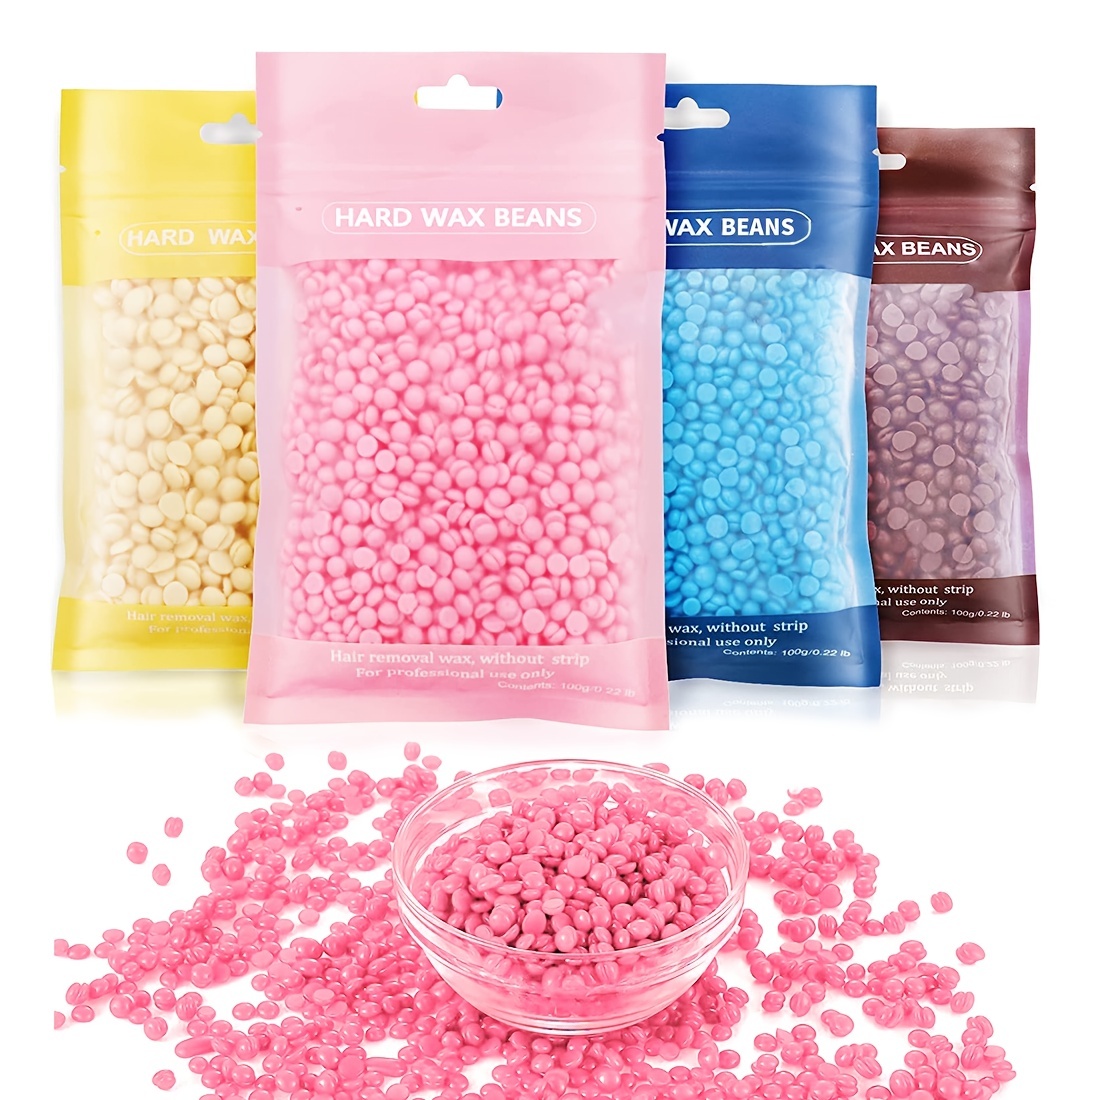  Hard Wax Beads For Hair Removal 100g 35 OZ Total 10 Colors  Hard Wax Beans Pack Bulk Wax Pearls For Home Waxing Waxing Sticks for Hard  Wax : Beauty & Personal Care